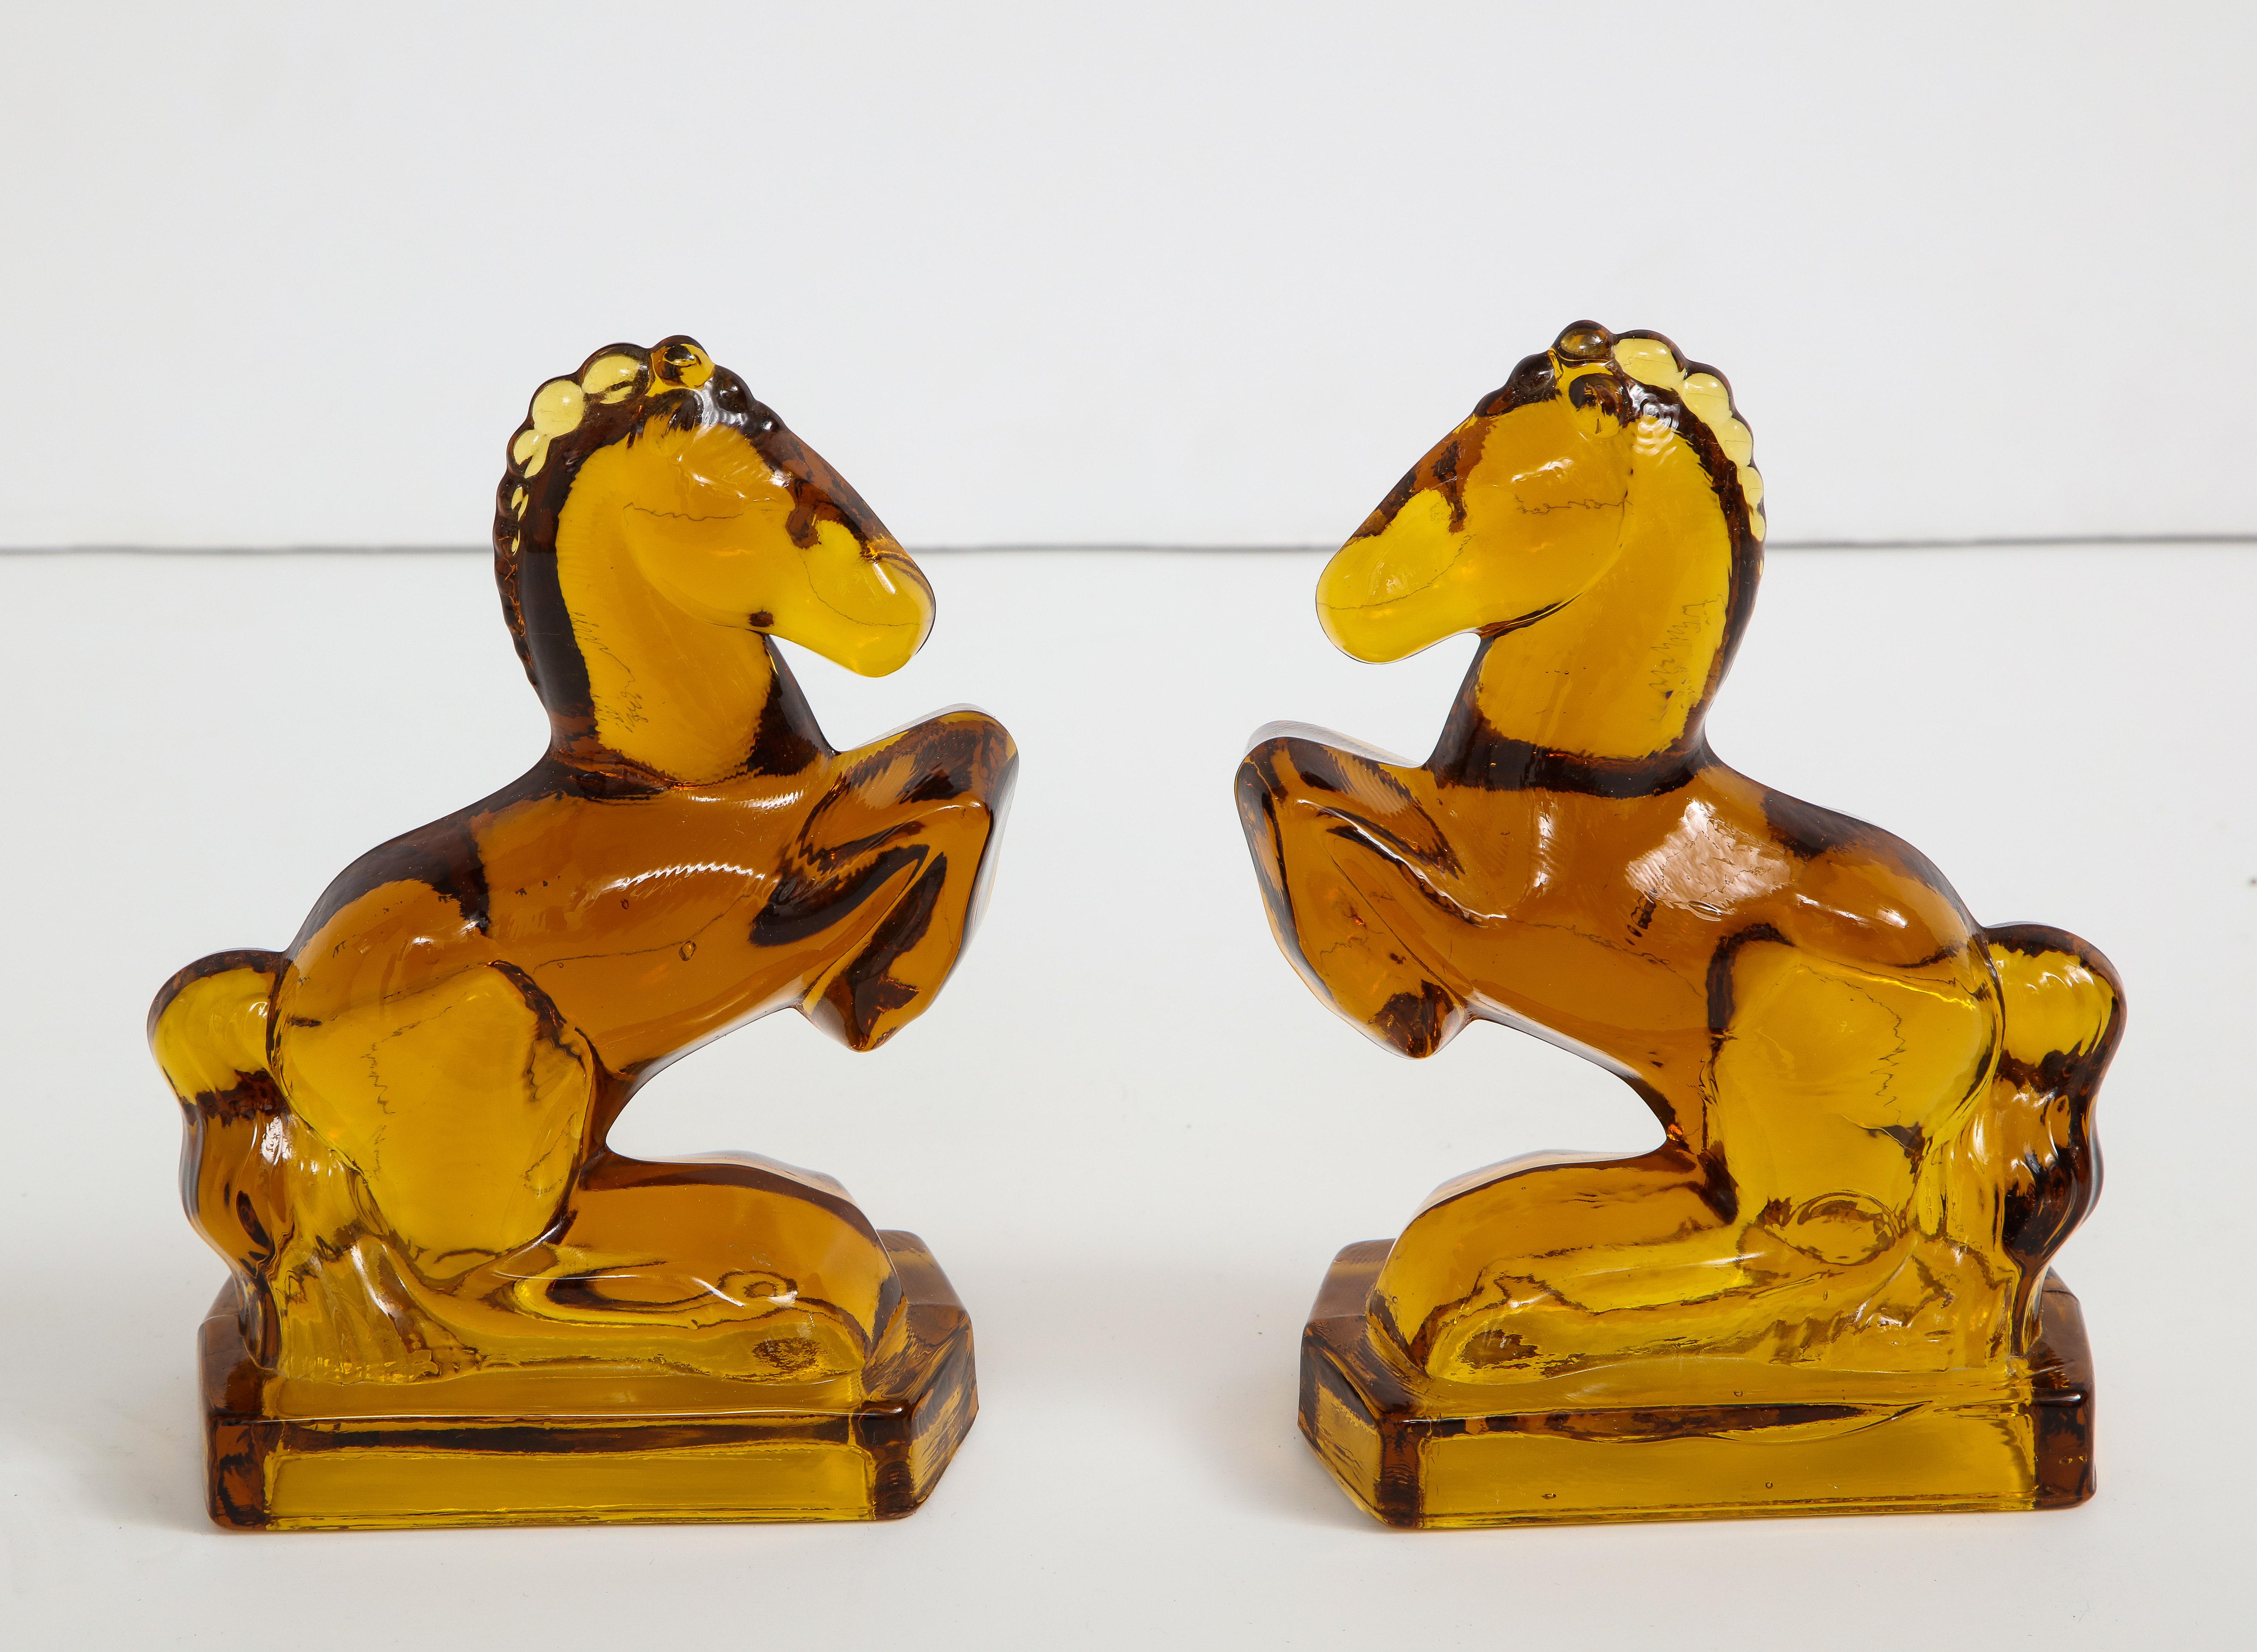 Set of Art Deco amber glass stylized prancing horse bookends, circa 1930s.